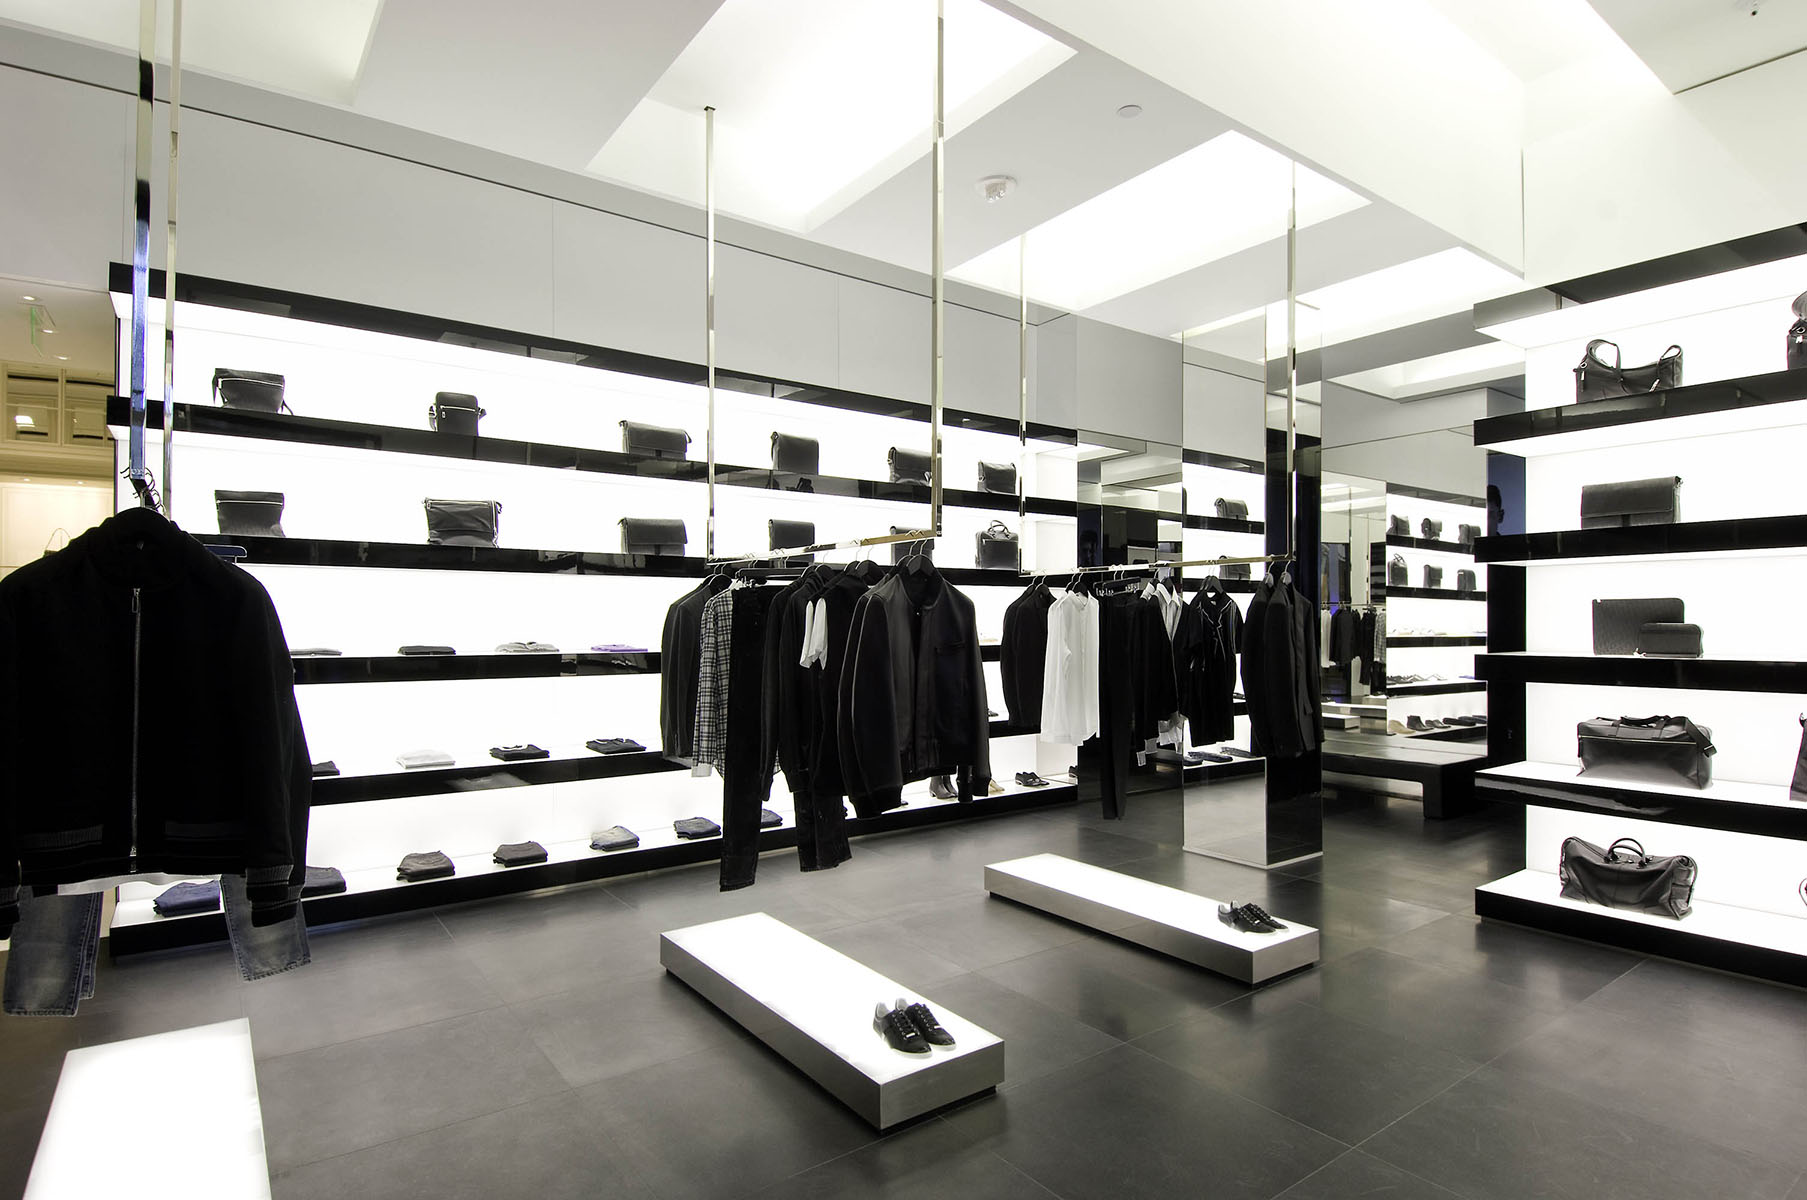 Dior Homme Opens Store in South Coast Plaza – WWD